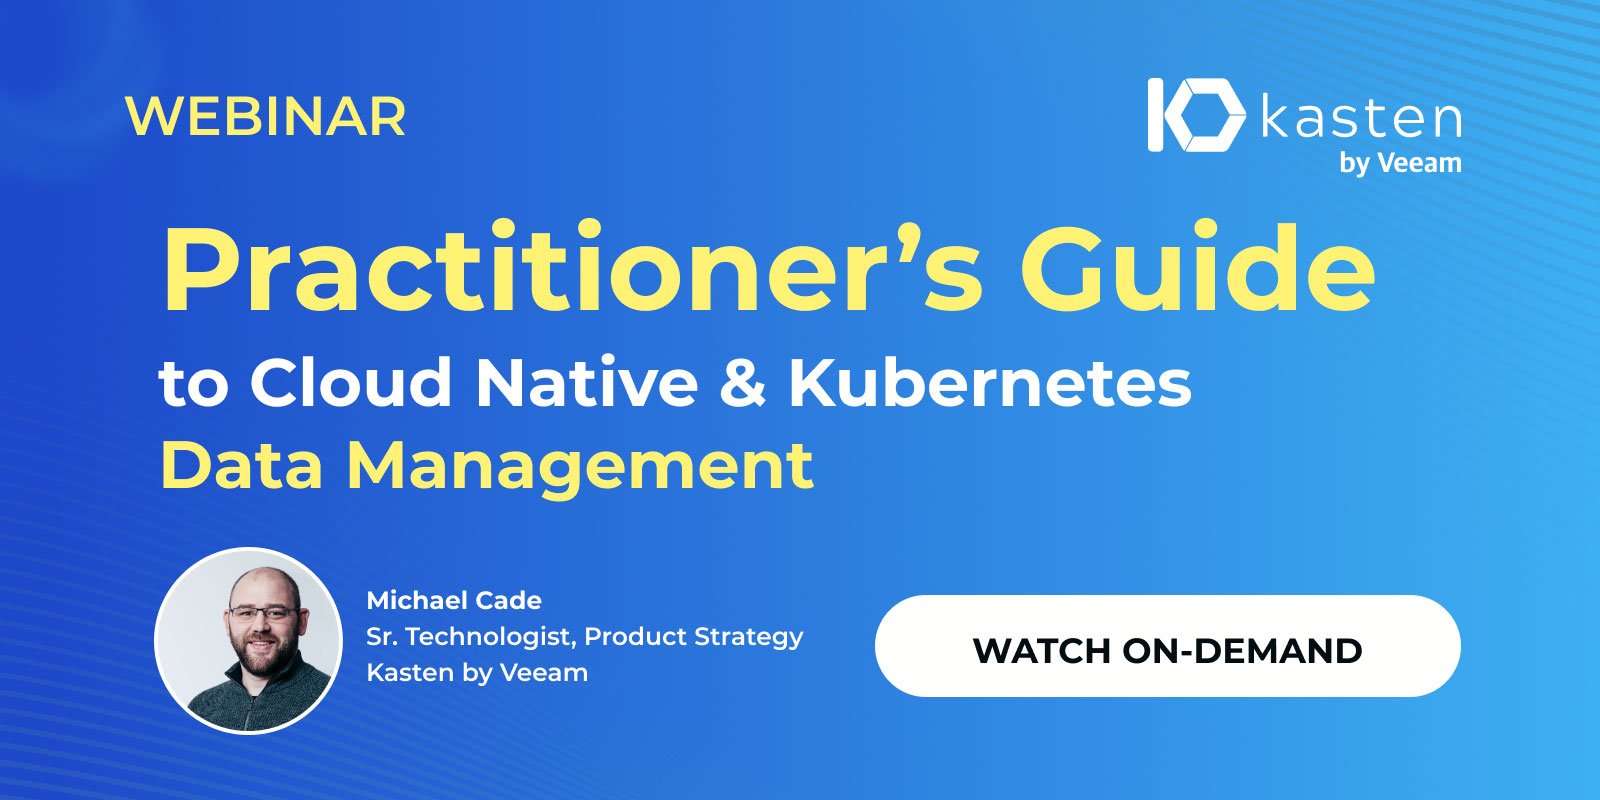 Practitioners Guide to Kubernetes & Cloud Native Data Management